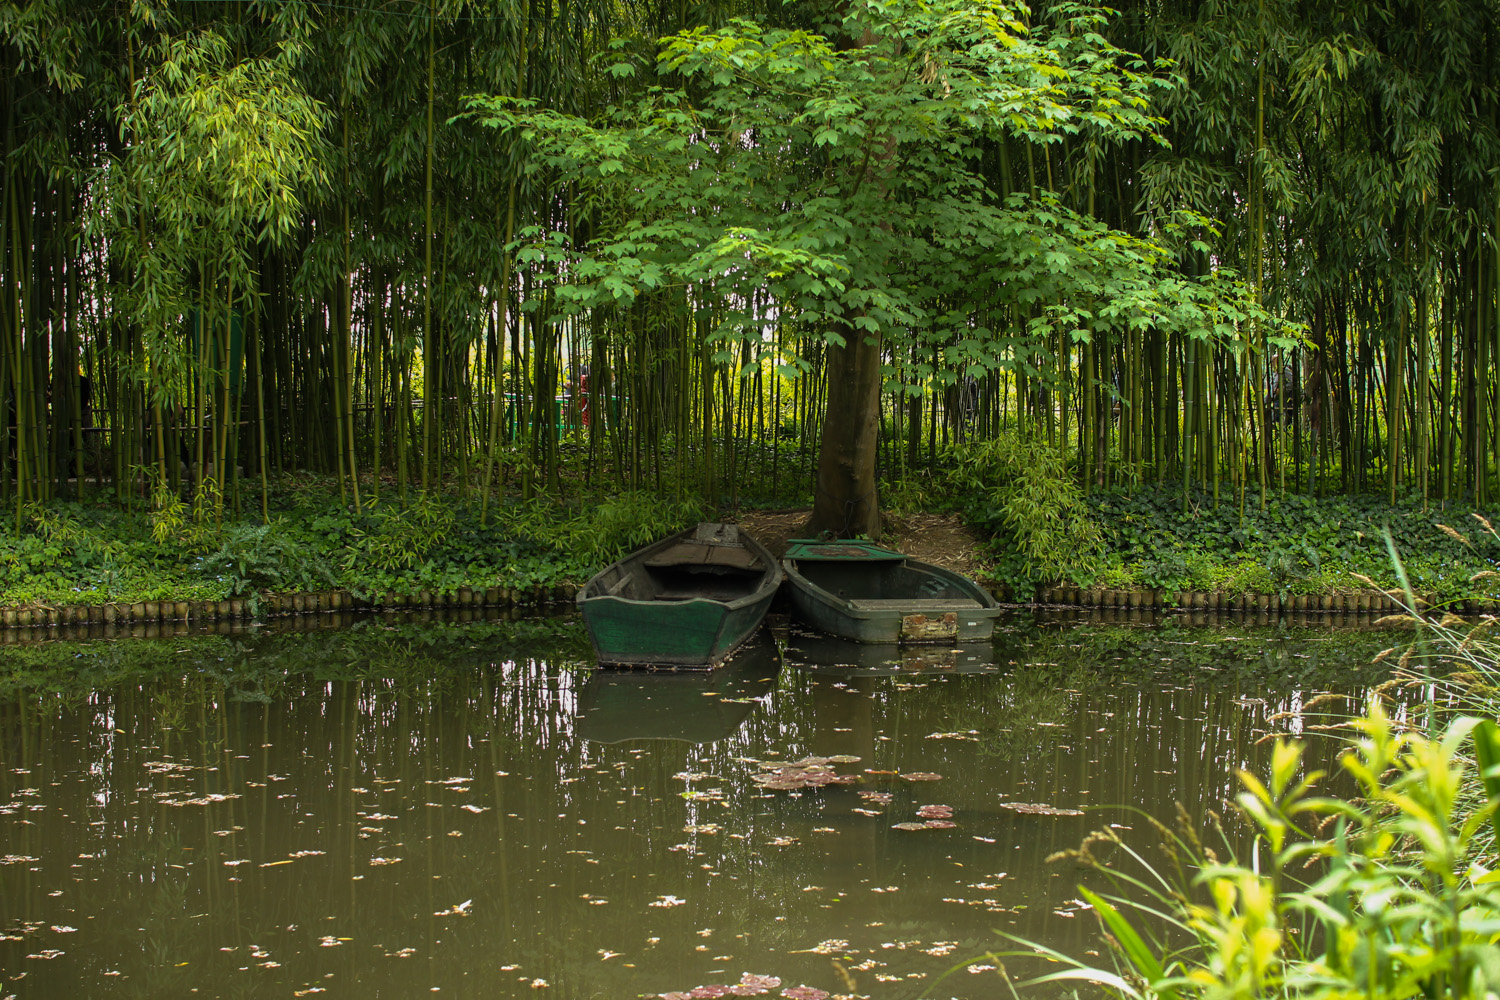 Boats in Monet's Garden, Giverny